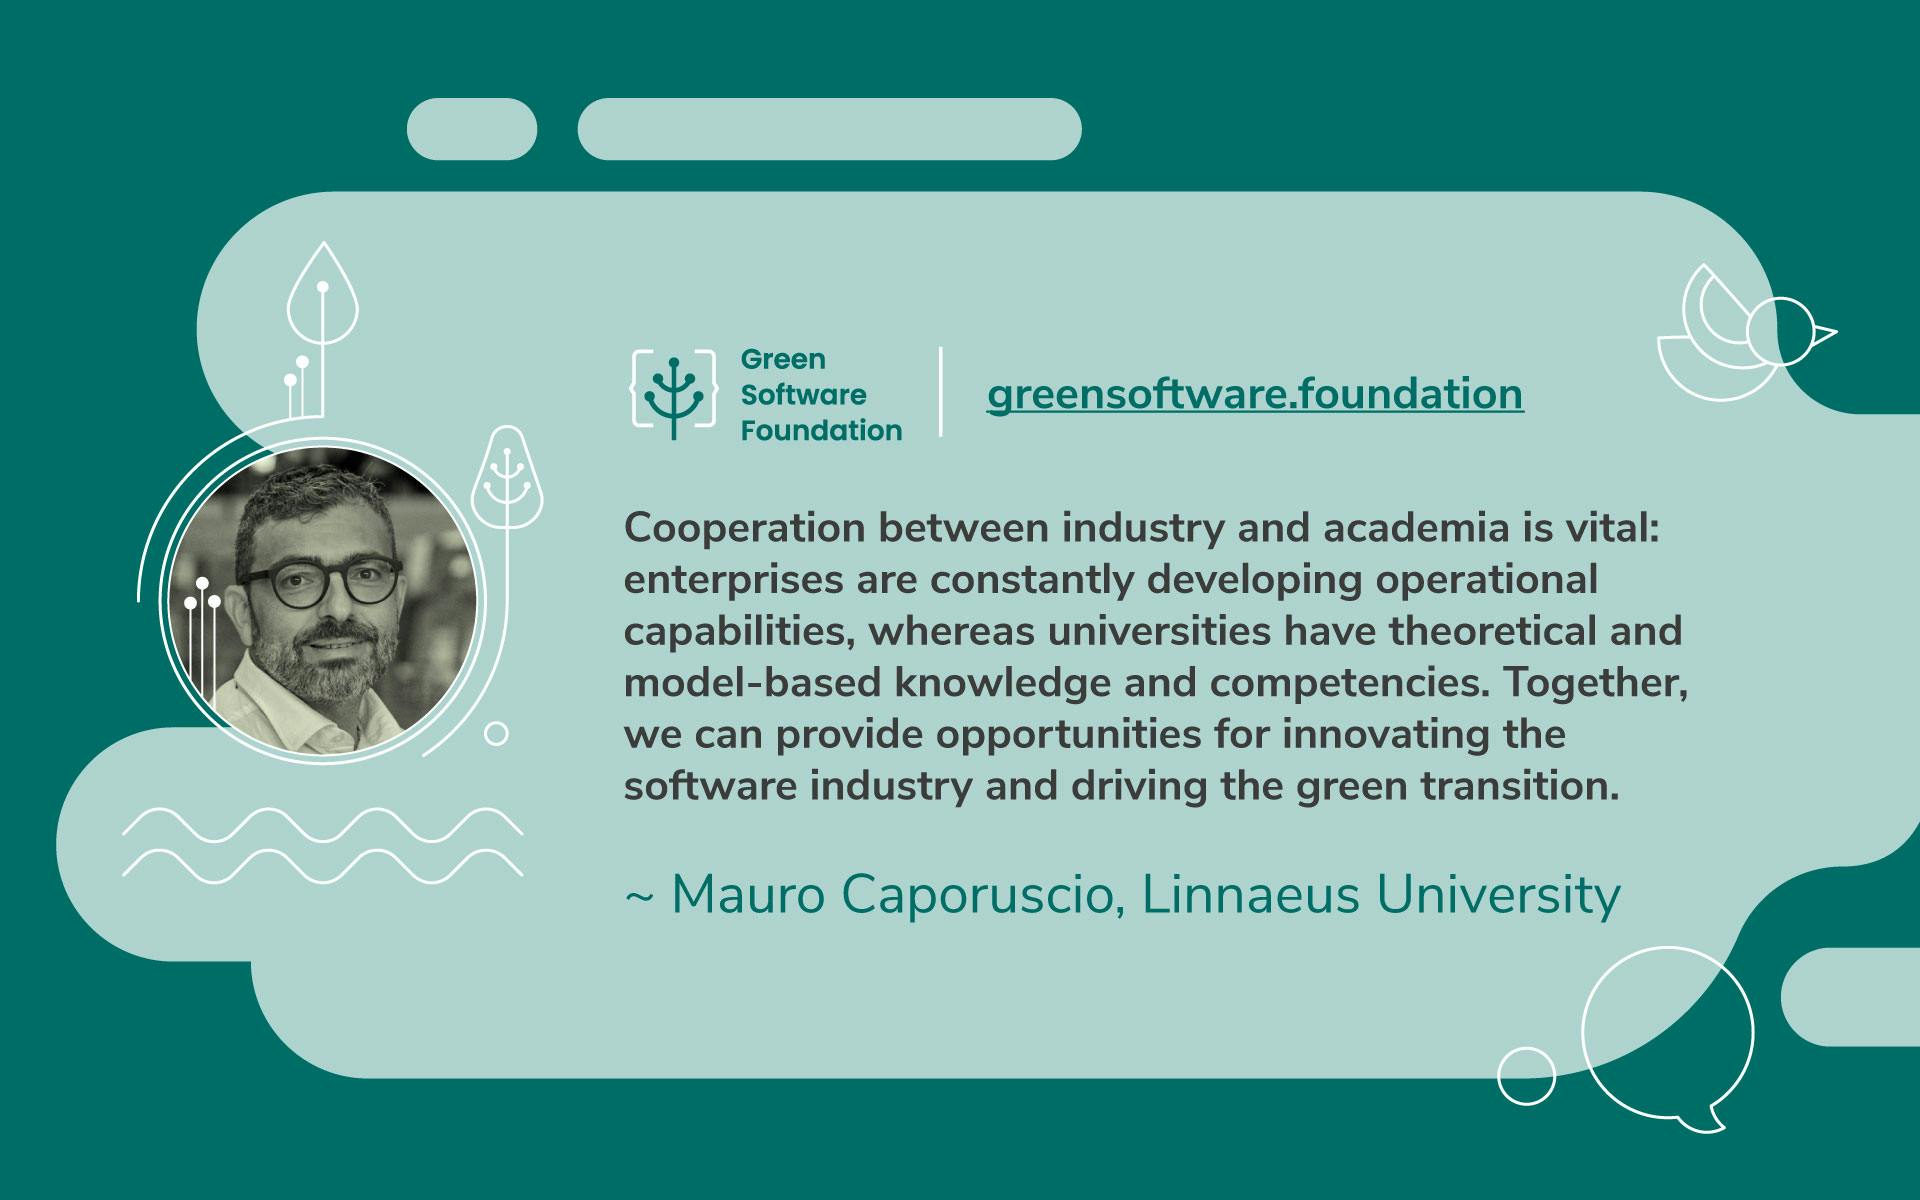 Sustainability as a Primary Integrated Requirement for Software - Meet Mauro Caporuscio, Professor of Computer Science at Linnaeus University